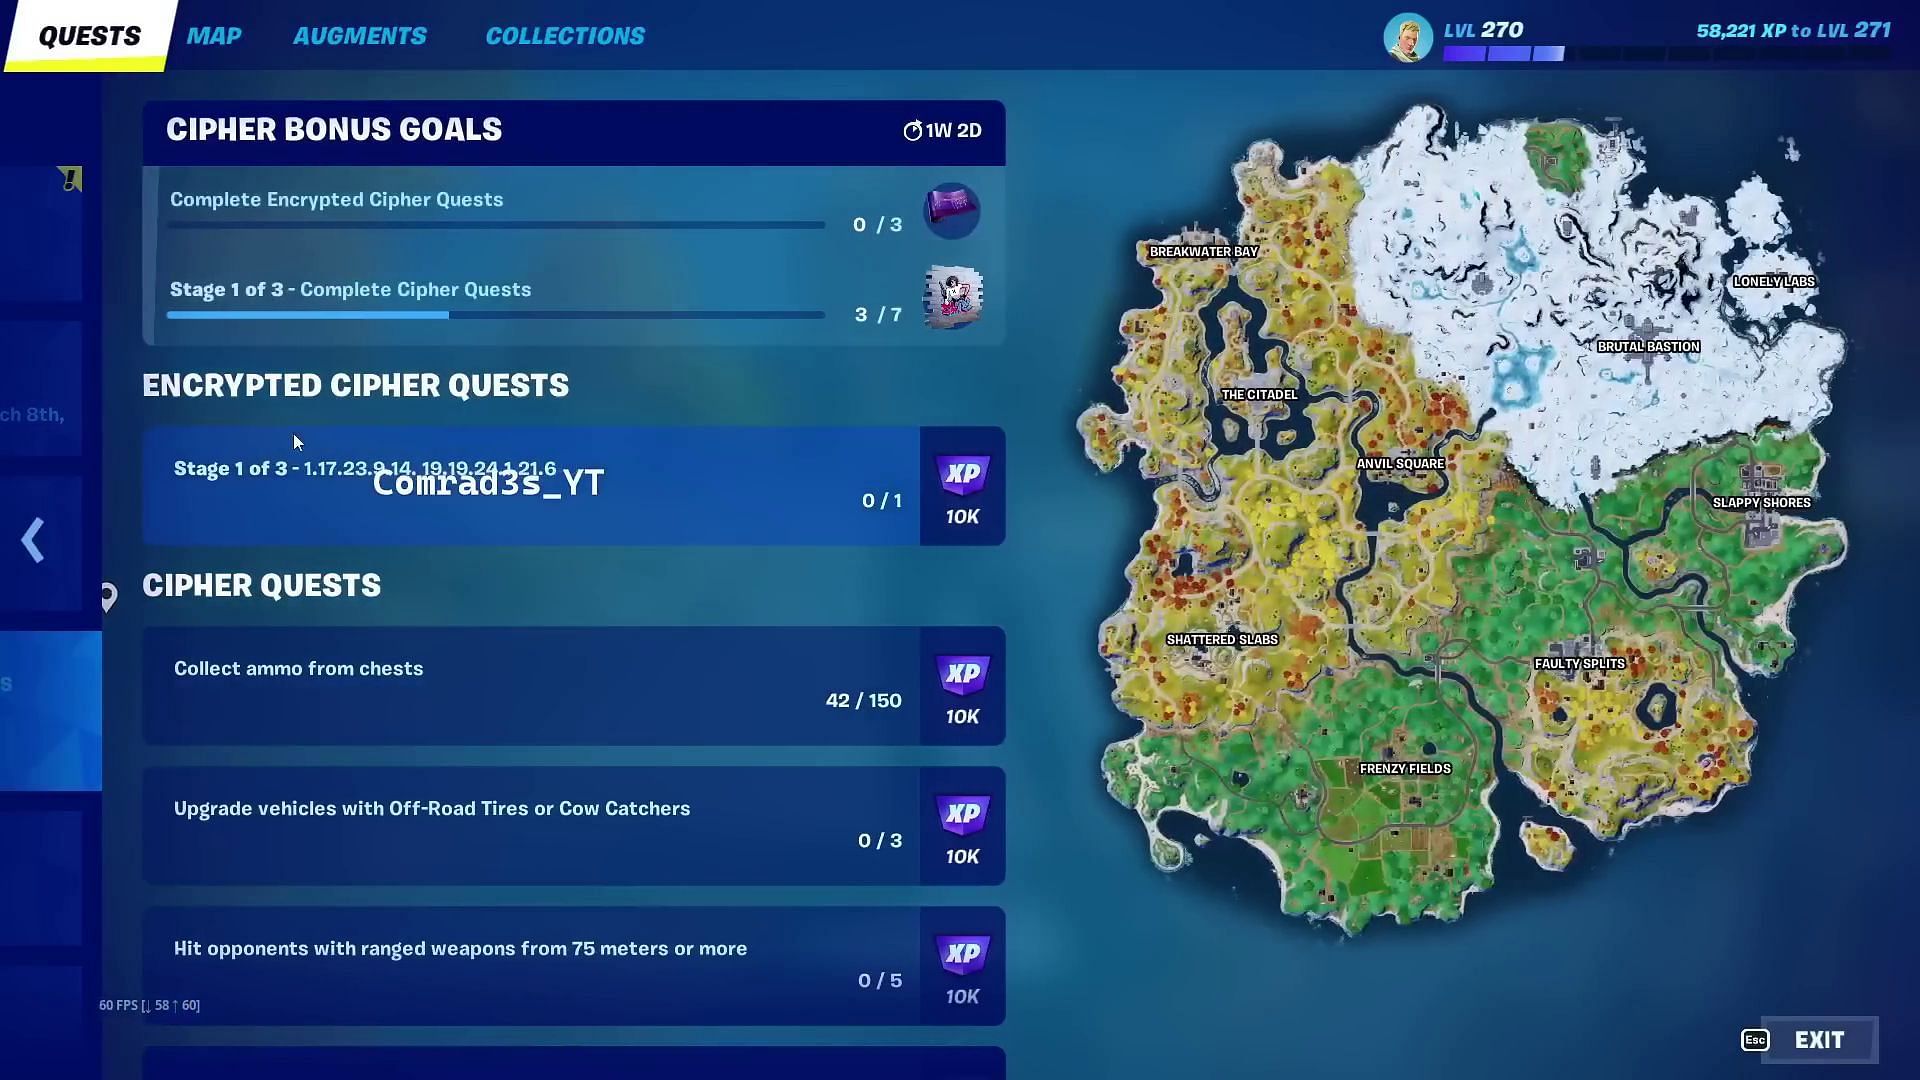 Stage 1 of Cipher Quests in Fortnite. (Image via YouTube/Comrad3s)